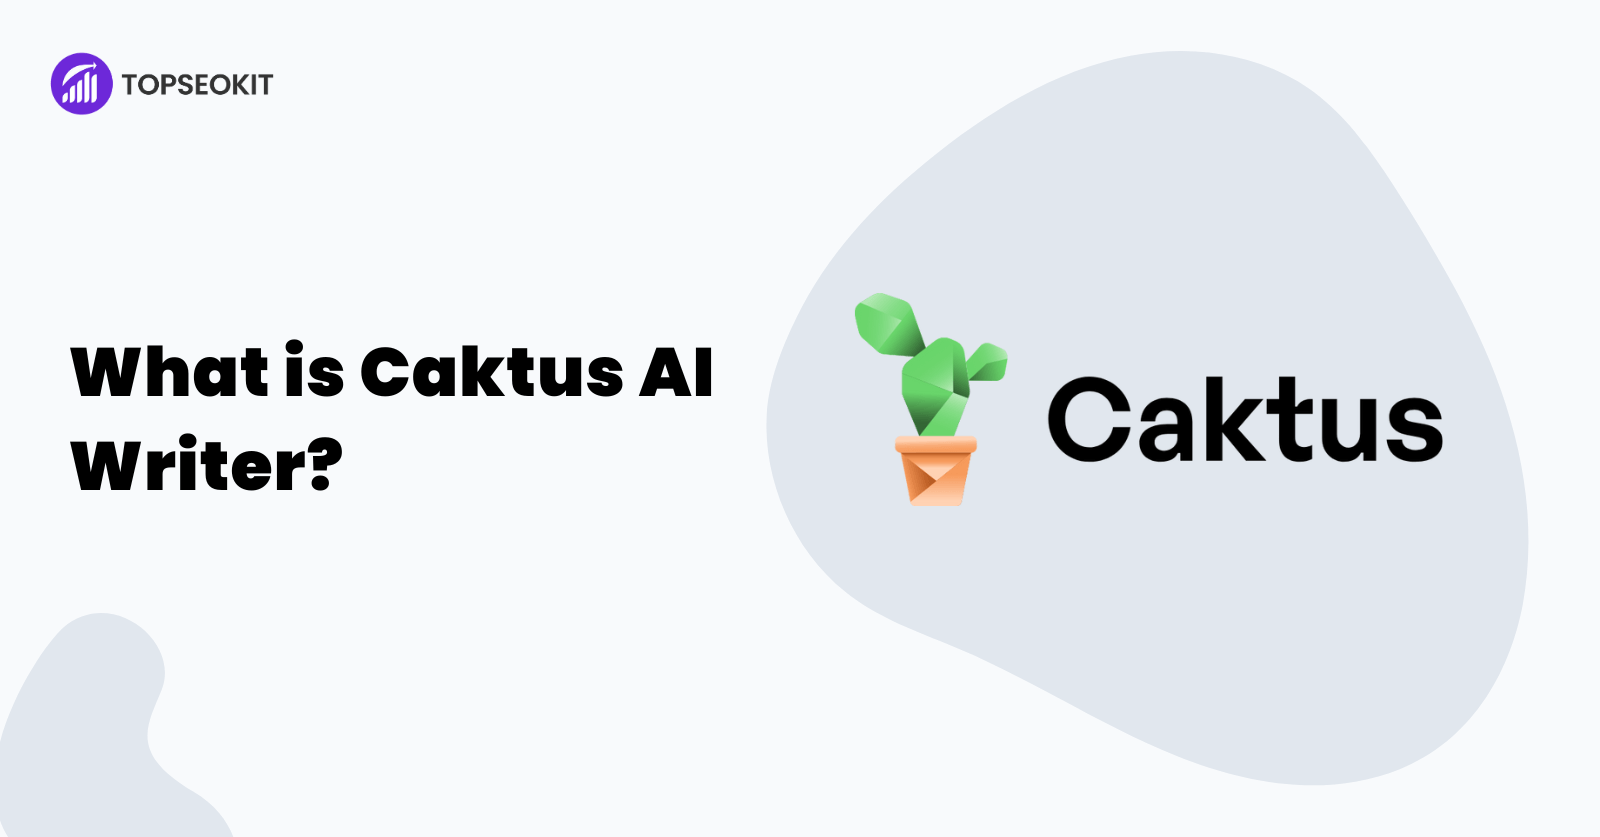 What is Caktus AI Writer?